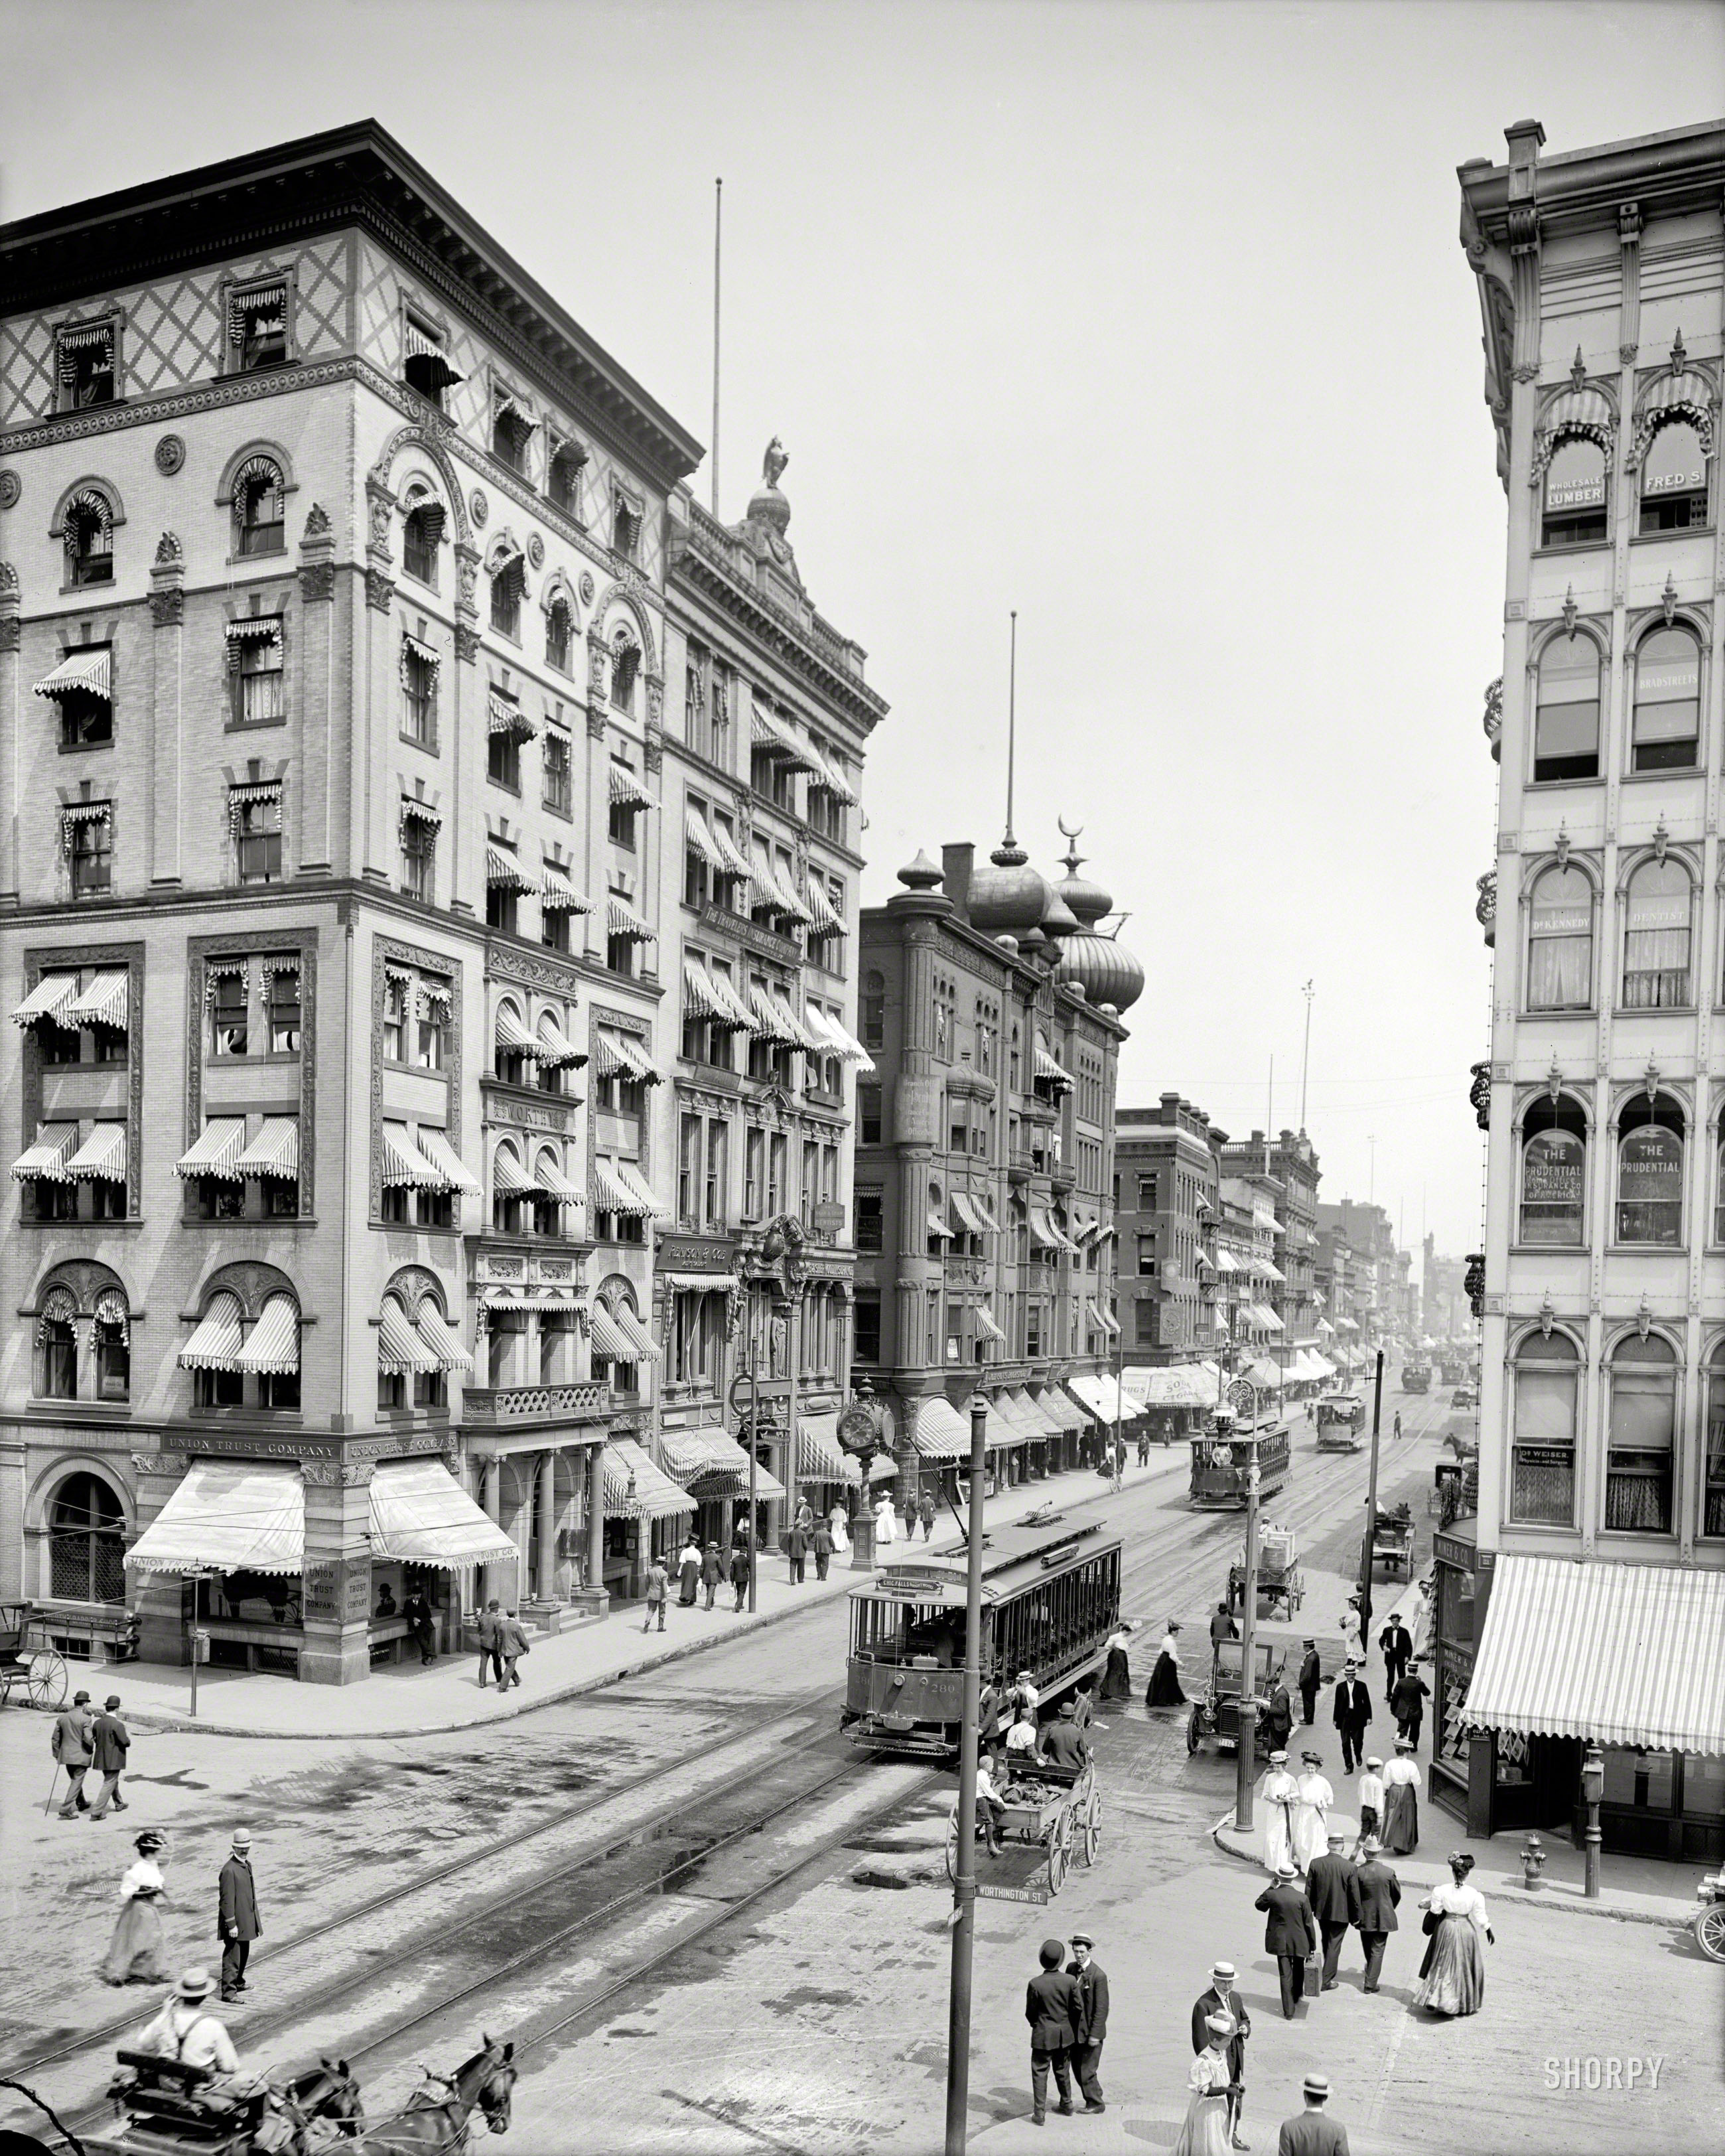 Springfield, Mass., circa 1908. "Worthy Hotel, Worthington and Main Sts." Dozens of errands frozen in time on this  8x10 glass negative. View full size.